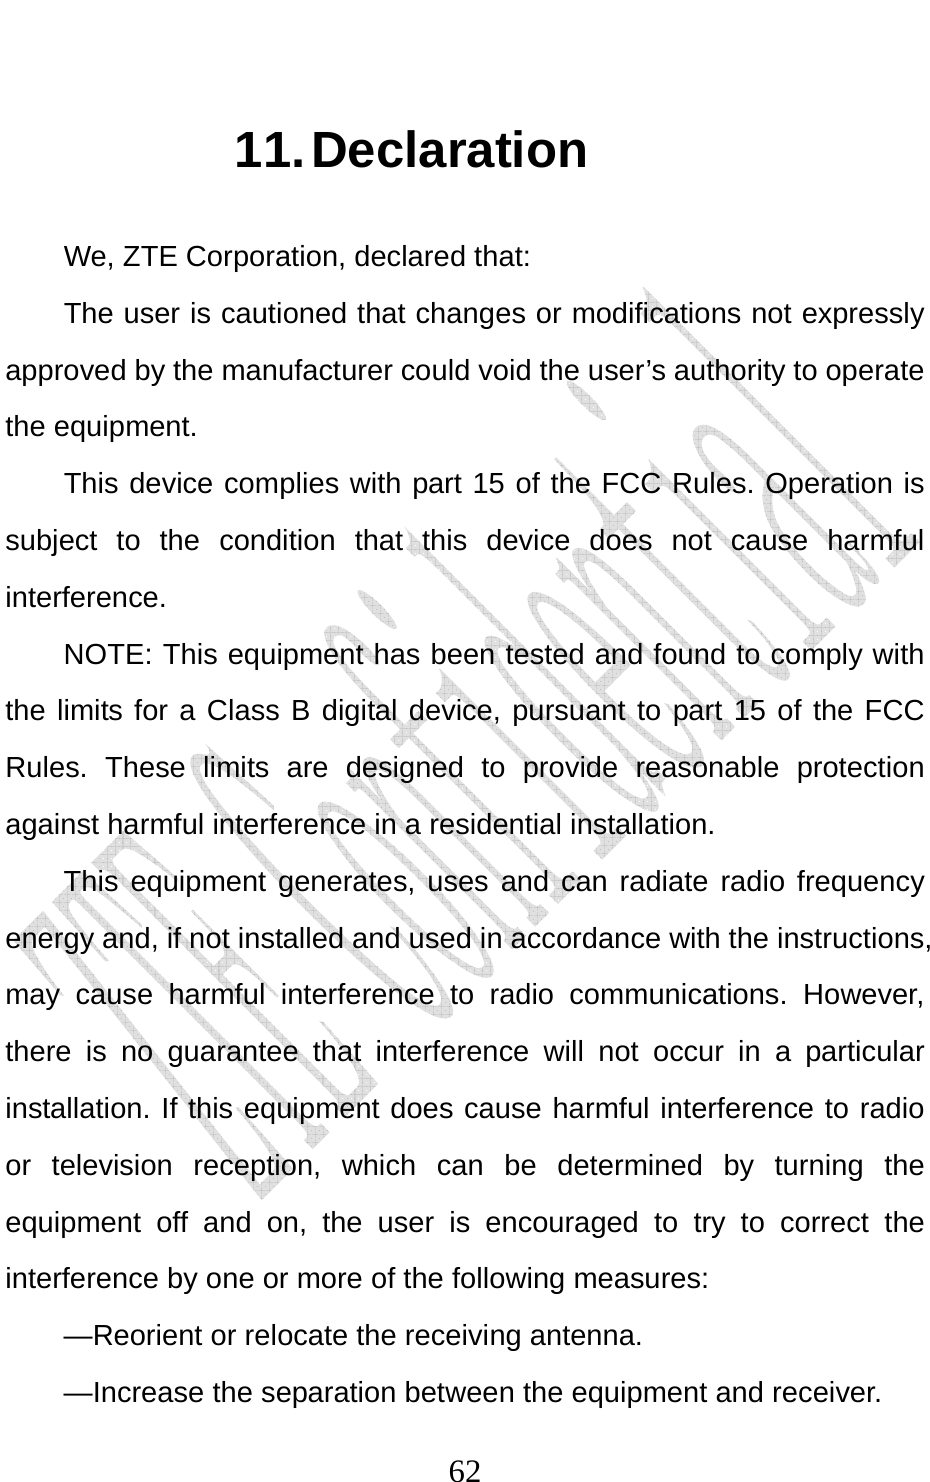                              6211. Declaration We, ZTE Corporation, declared that: The user is cautioned that changes or modifications not expressly approved by the manufacturer could void the user’s authority to operate the equipment. This device complies with part 15 of the FCC Rules. Operation is subject to the condition that this device does not cause harmful interference. NOTE: This equipment has been tested and found to comply with the limits for a Class B digital device, pursuant to part 15 of the FCC Rules. These limits are designed to provide reasonable protection against harmful interference in a residential installation.   This equipment generates, uses and can radiate radio frequency energy and, if not installed and used in accordance with the instructions, may cause harmful interference to radio communications. However, there is no guarantee that interference will not occur in a particular installation. If this equipment does cause harmful interference to radio or television reception, which can be determined by turning the equipment off and on, the user is encouraged to try to correct the interference by one or more of the following measures: —Reorient or relocate the receiving antenna. —Increase the separation between the equipment and receiver. 